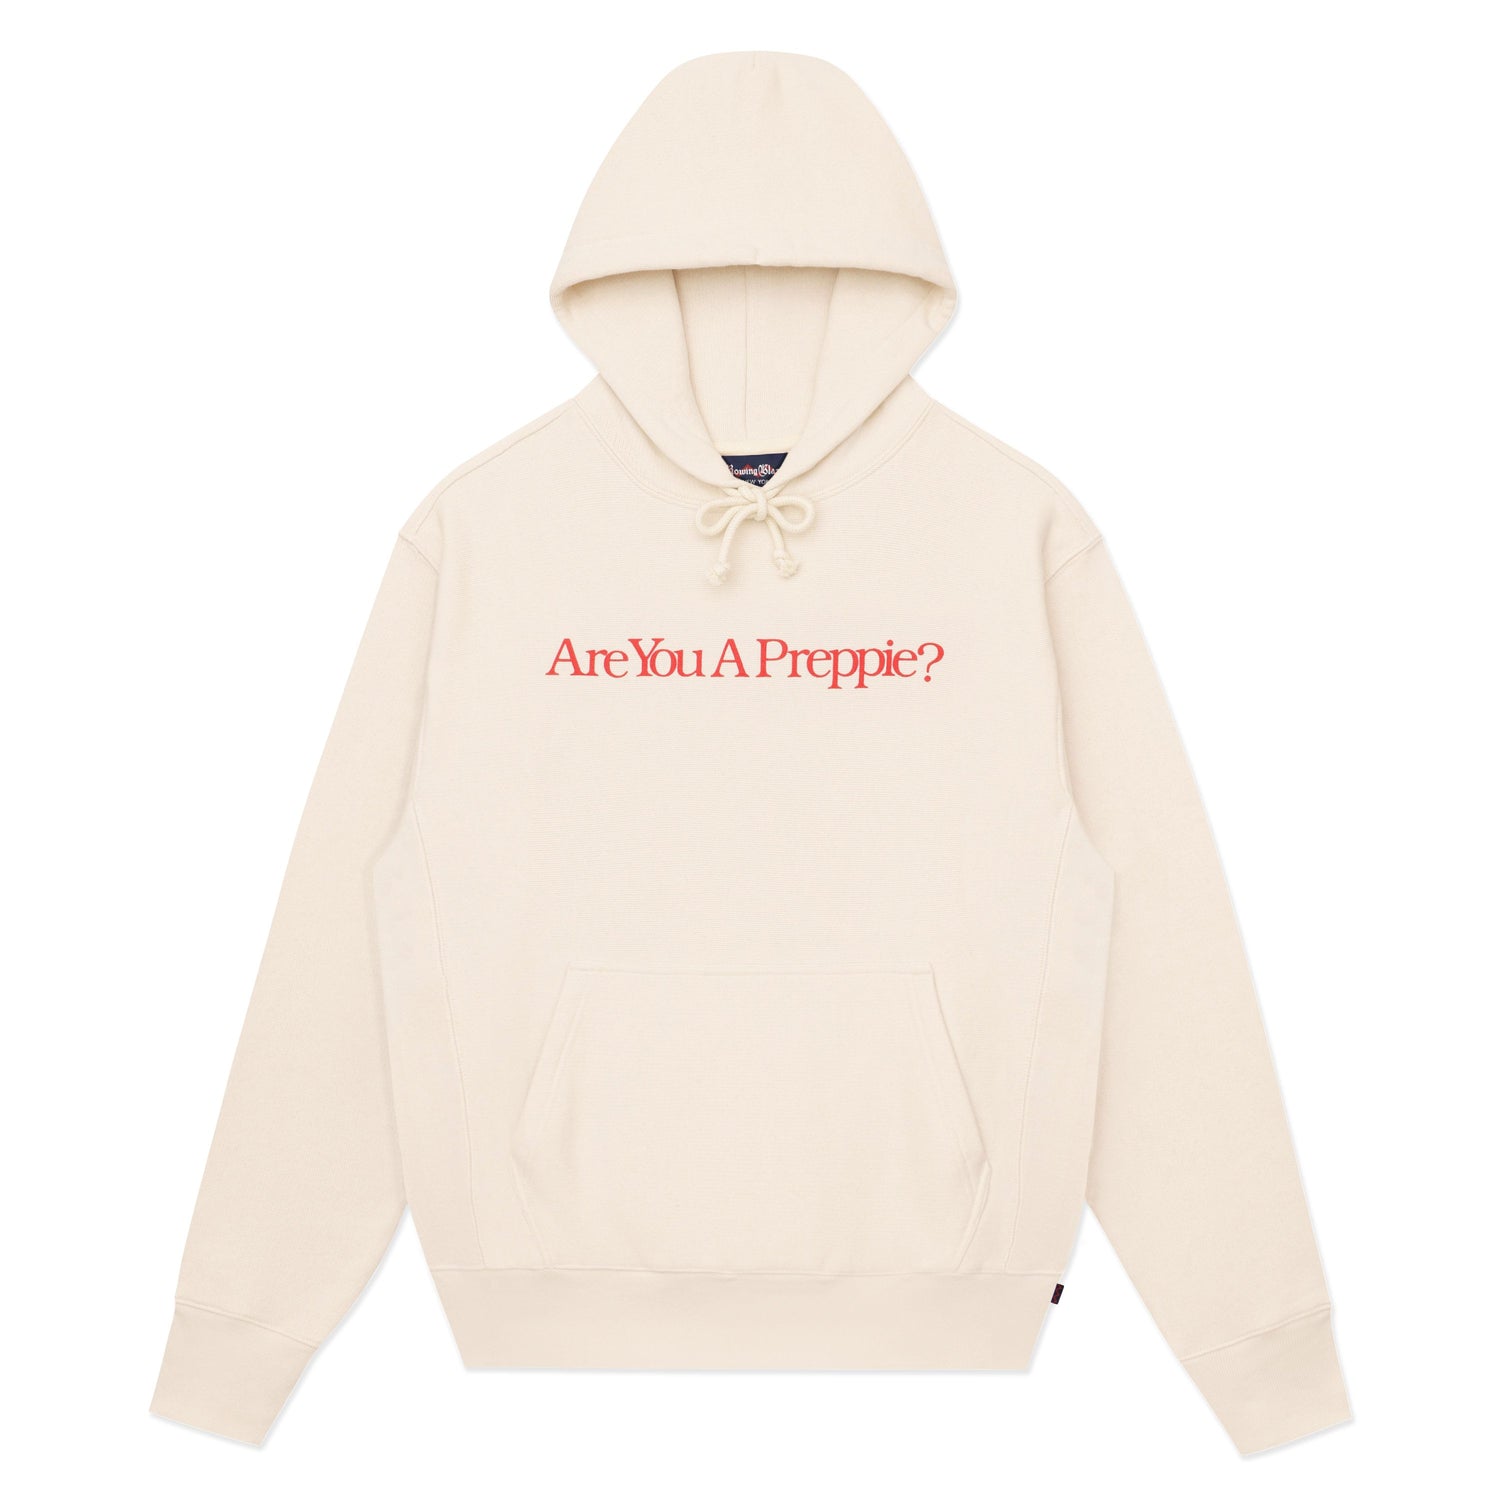 Front of cream hoodie with "Are You a Preppie?" across the chest.